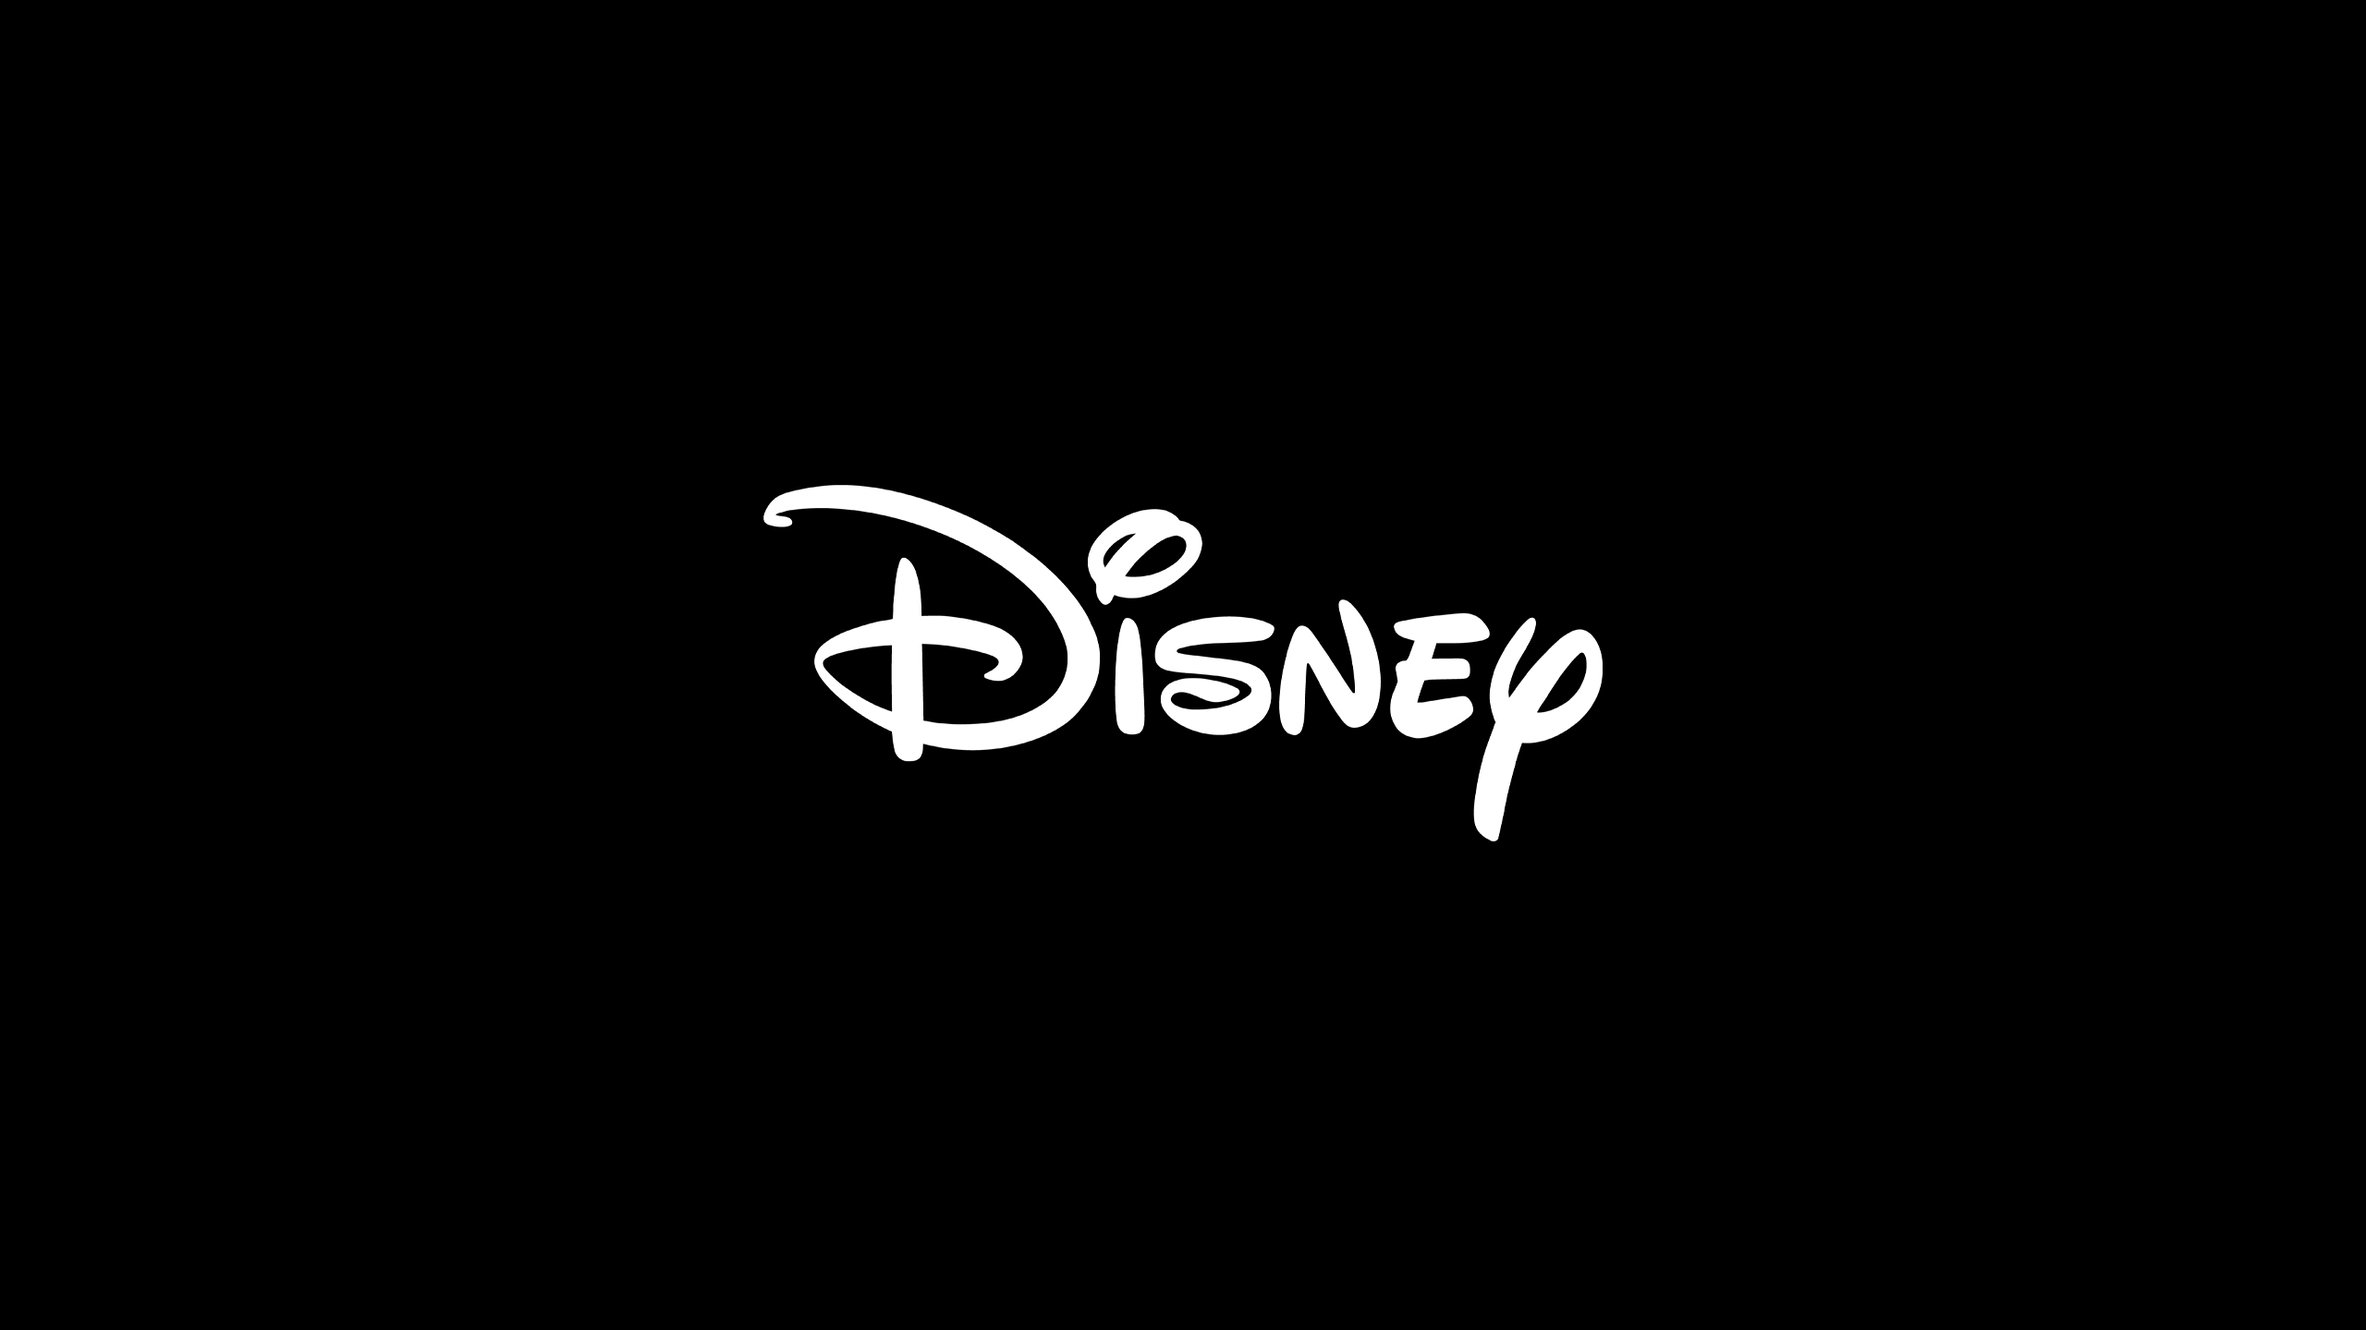 Brand New FX/Disney Series is looking For Men and Women